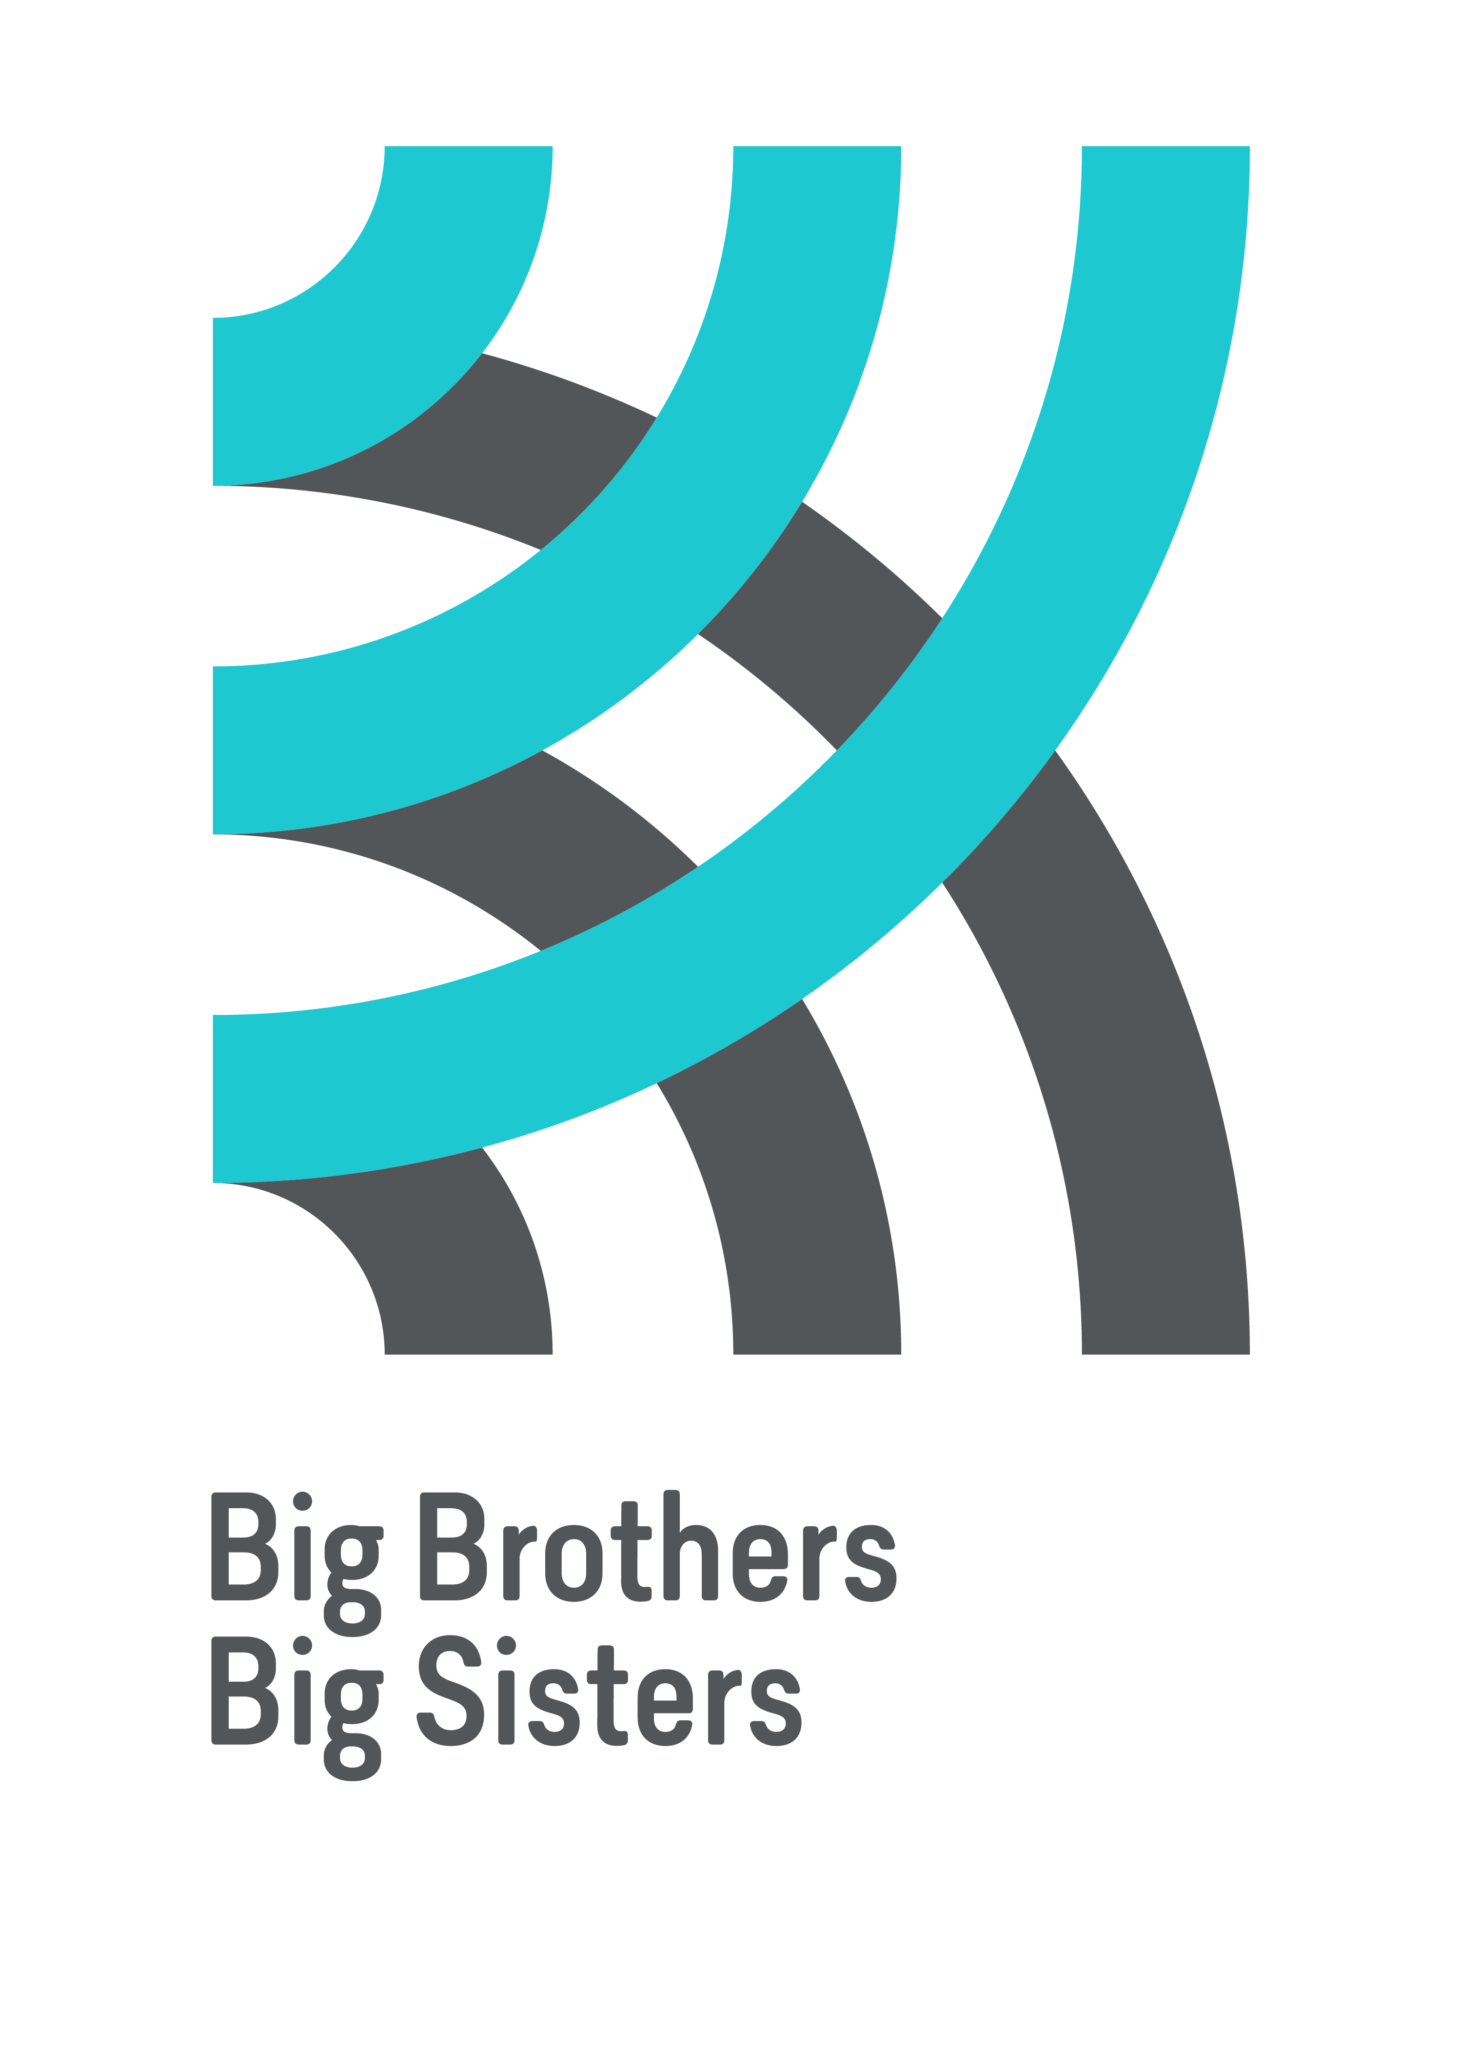 Big Brothers Big Sisters Canada And Indspire Announce Exciting New